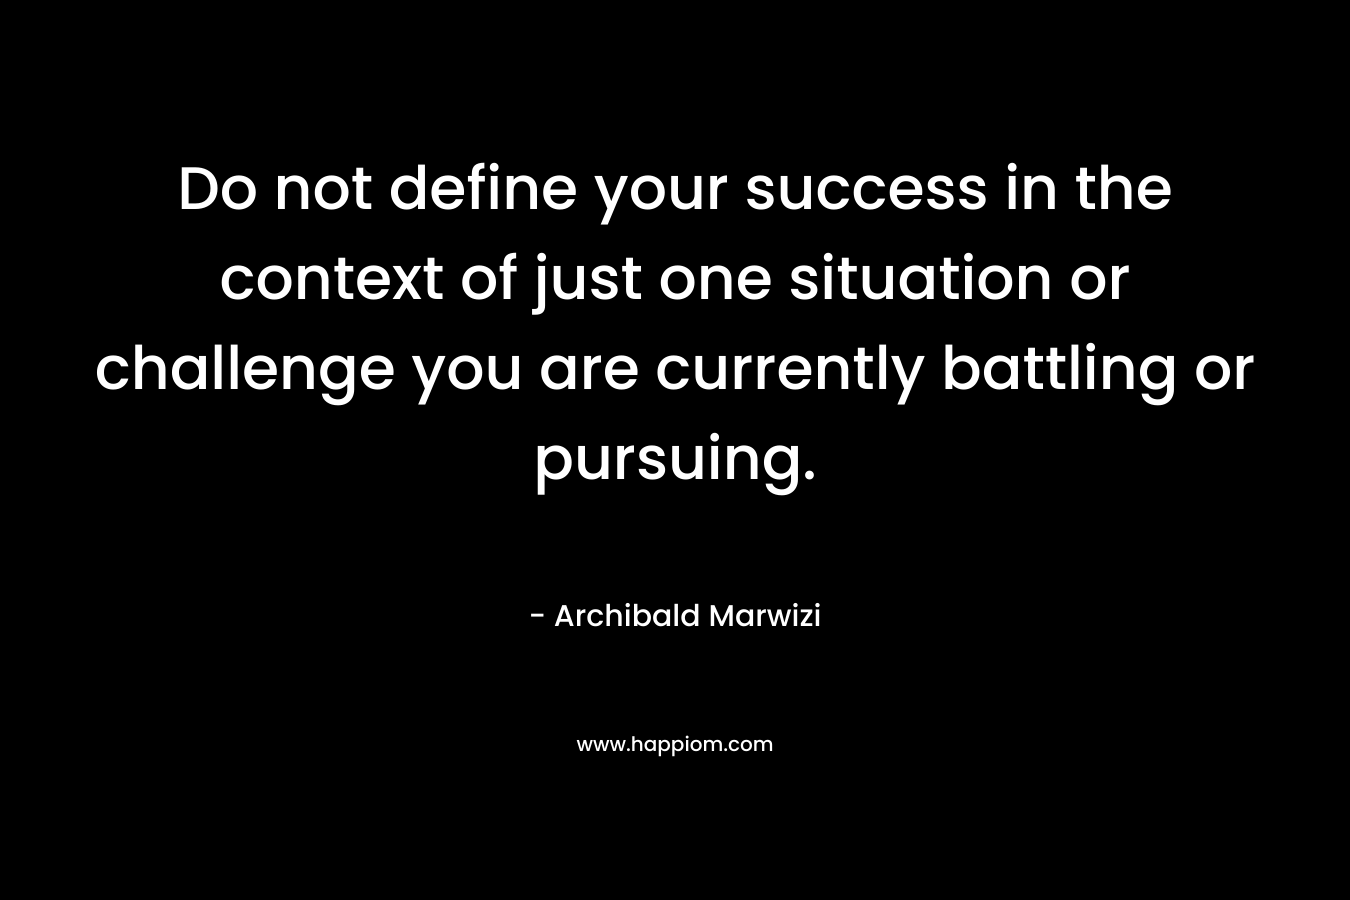 Do not define your success in the context of just one situation or challenge you are currently battling or pursuing.